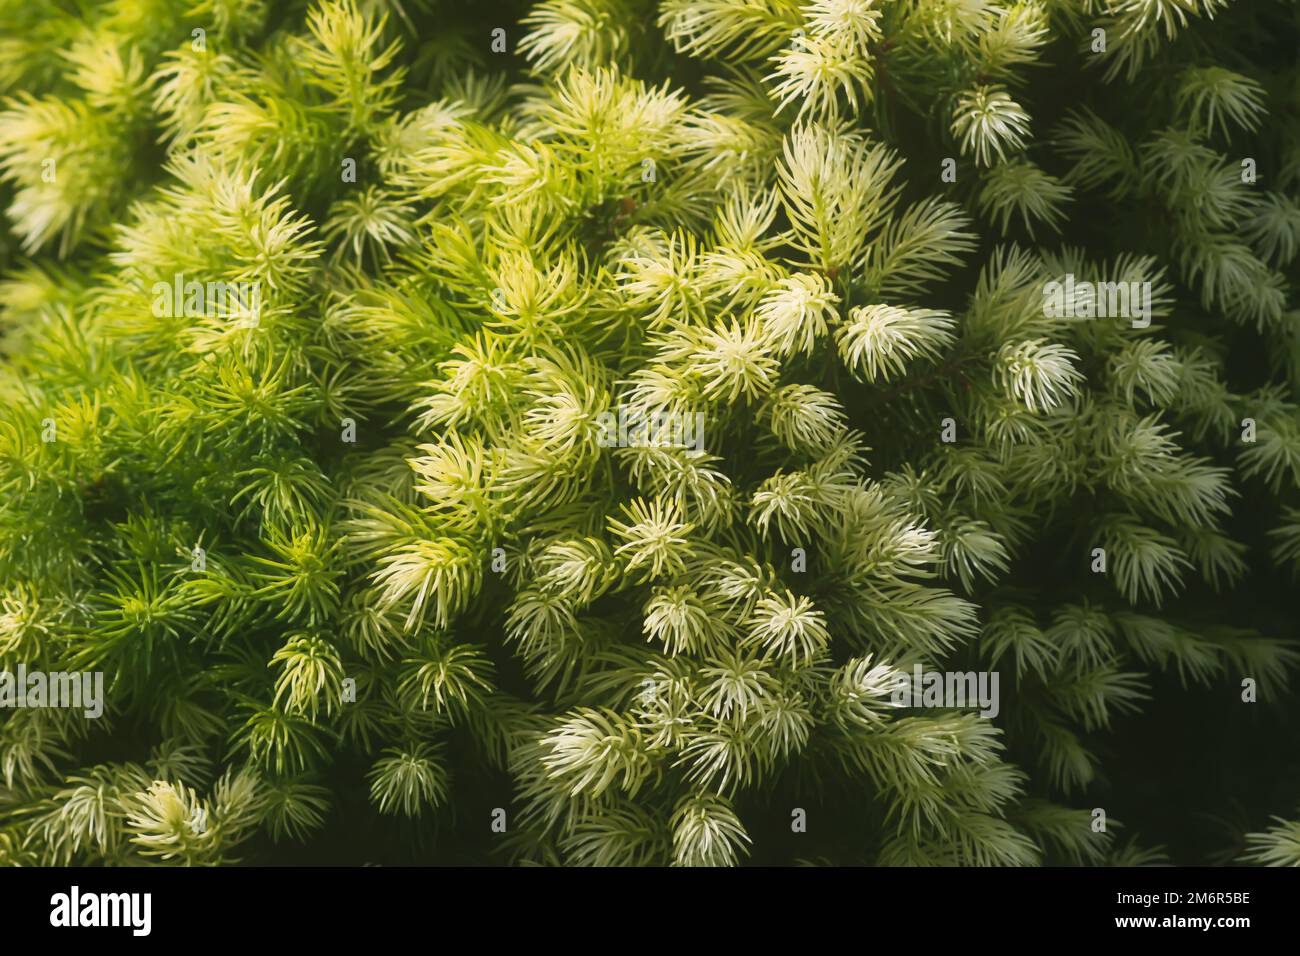 Spruce trees in a summer park. Evergreen trees close up in sunlight. Stock Photo